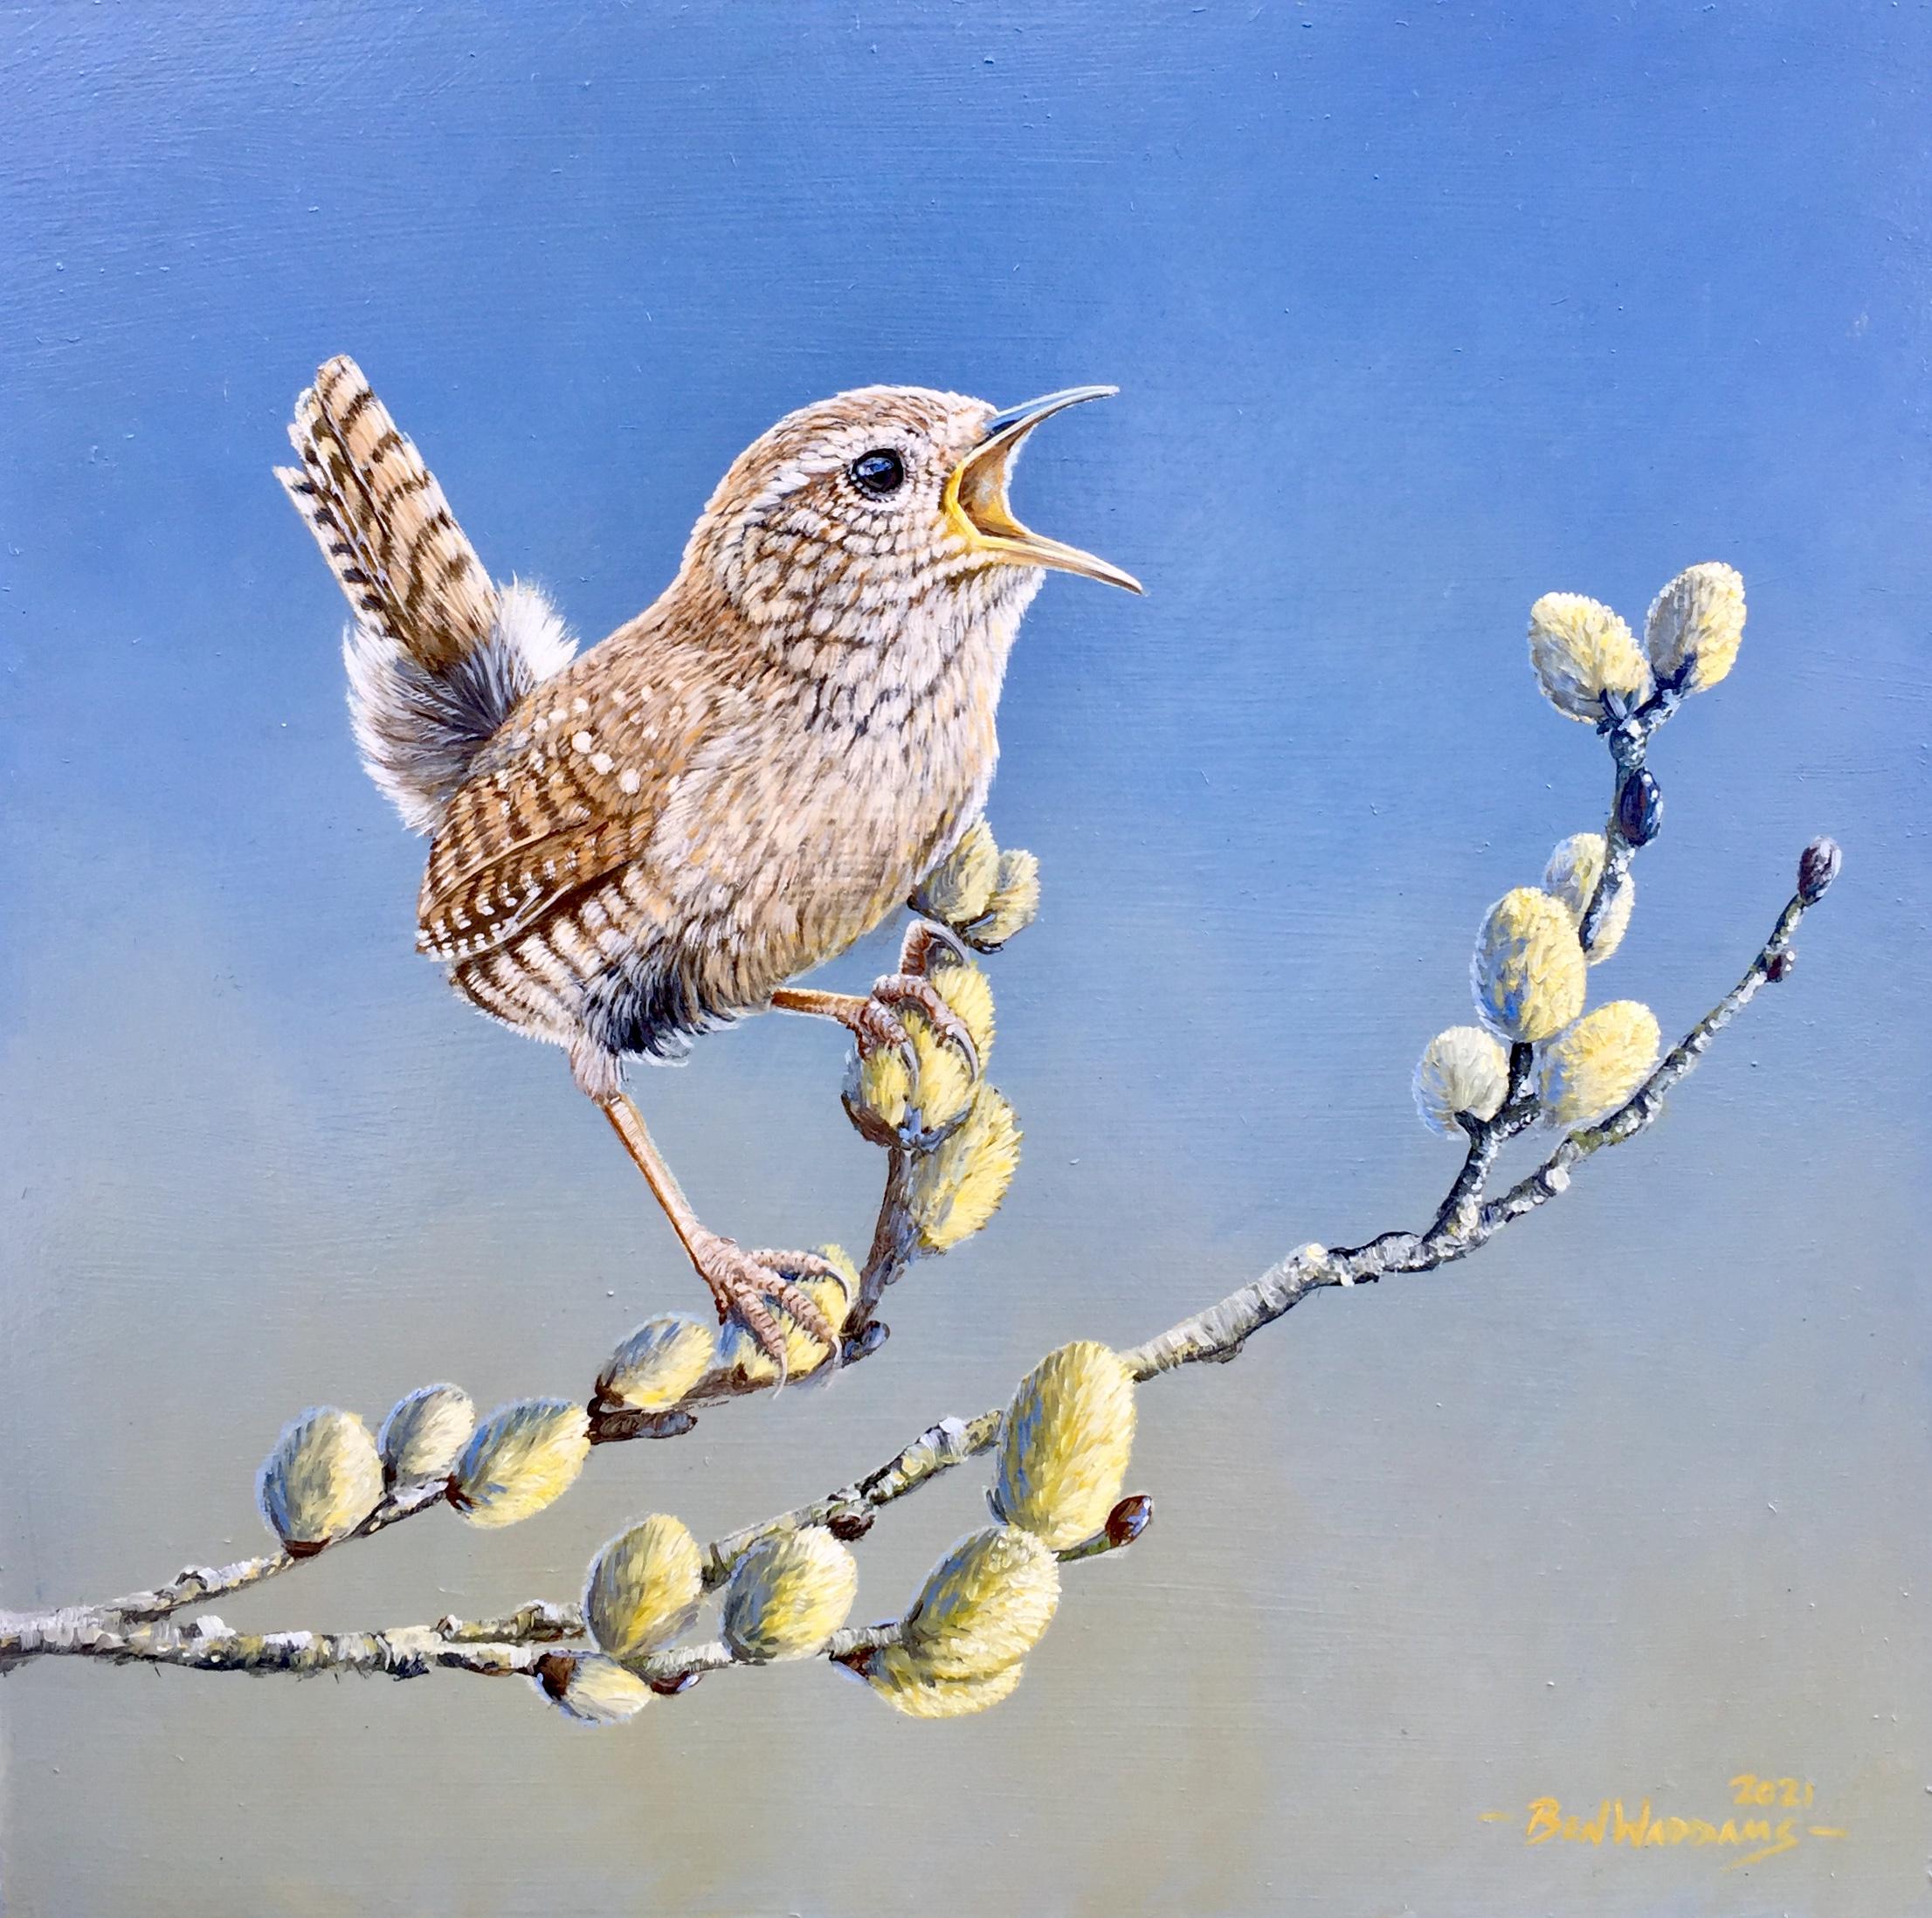 'Ever the Optimist' Contemporary photorealist painting of a Wren small bird wild